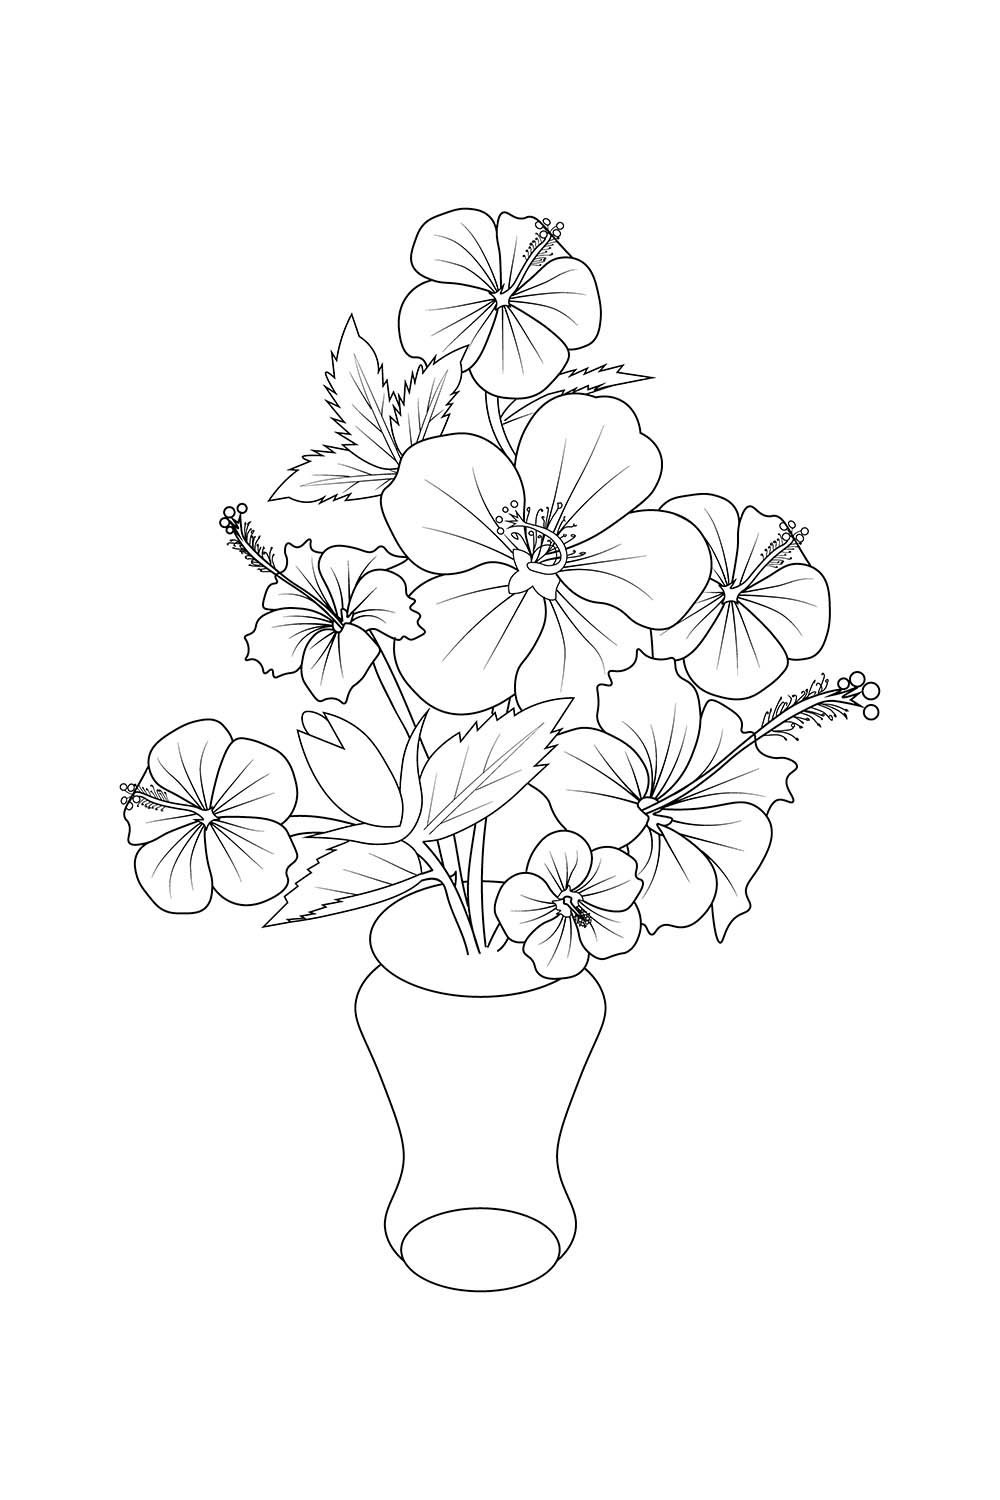 hibiscus flower coloring sheet china rose vector illustration, Sharon flower line art, hibiscus flower doodle and sticker pinterest preview image.